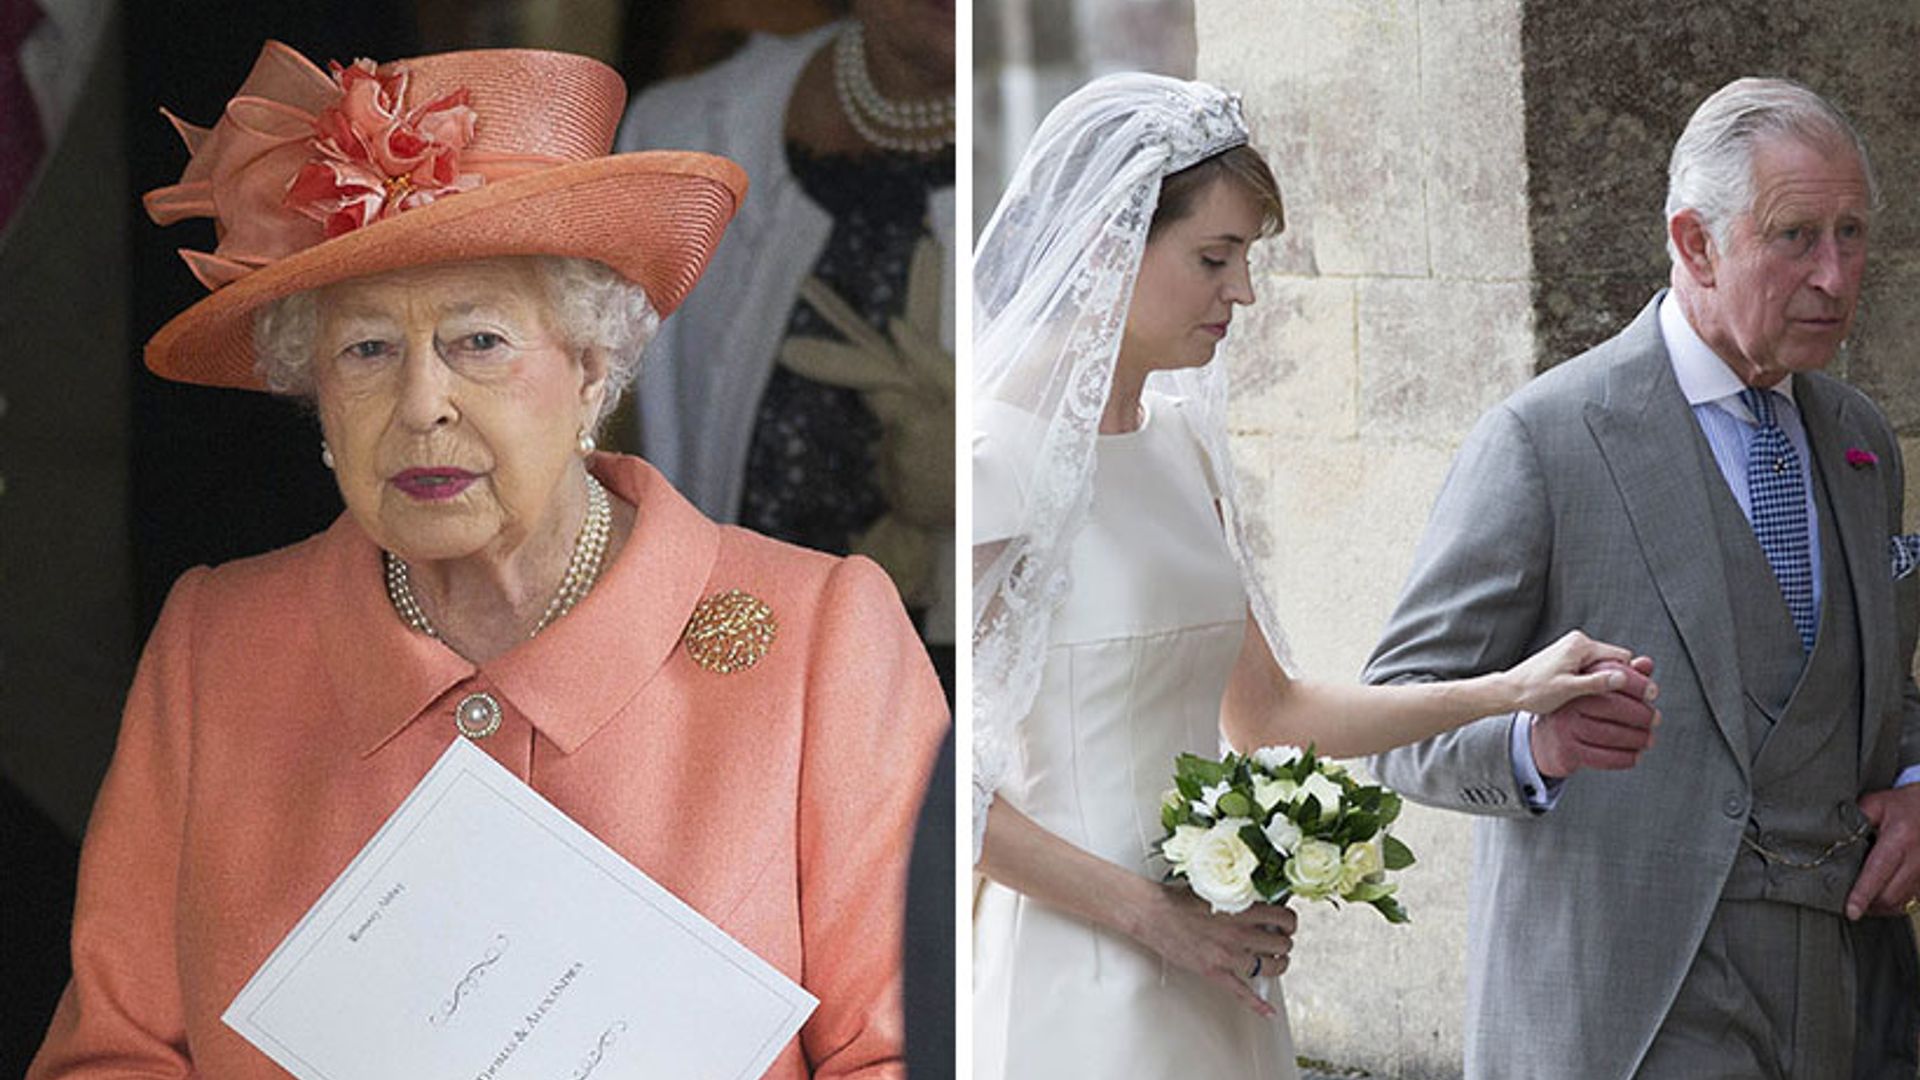 Prince Charles gives away best friend's daughter in stunning ceremony attended by the Queen